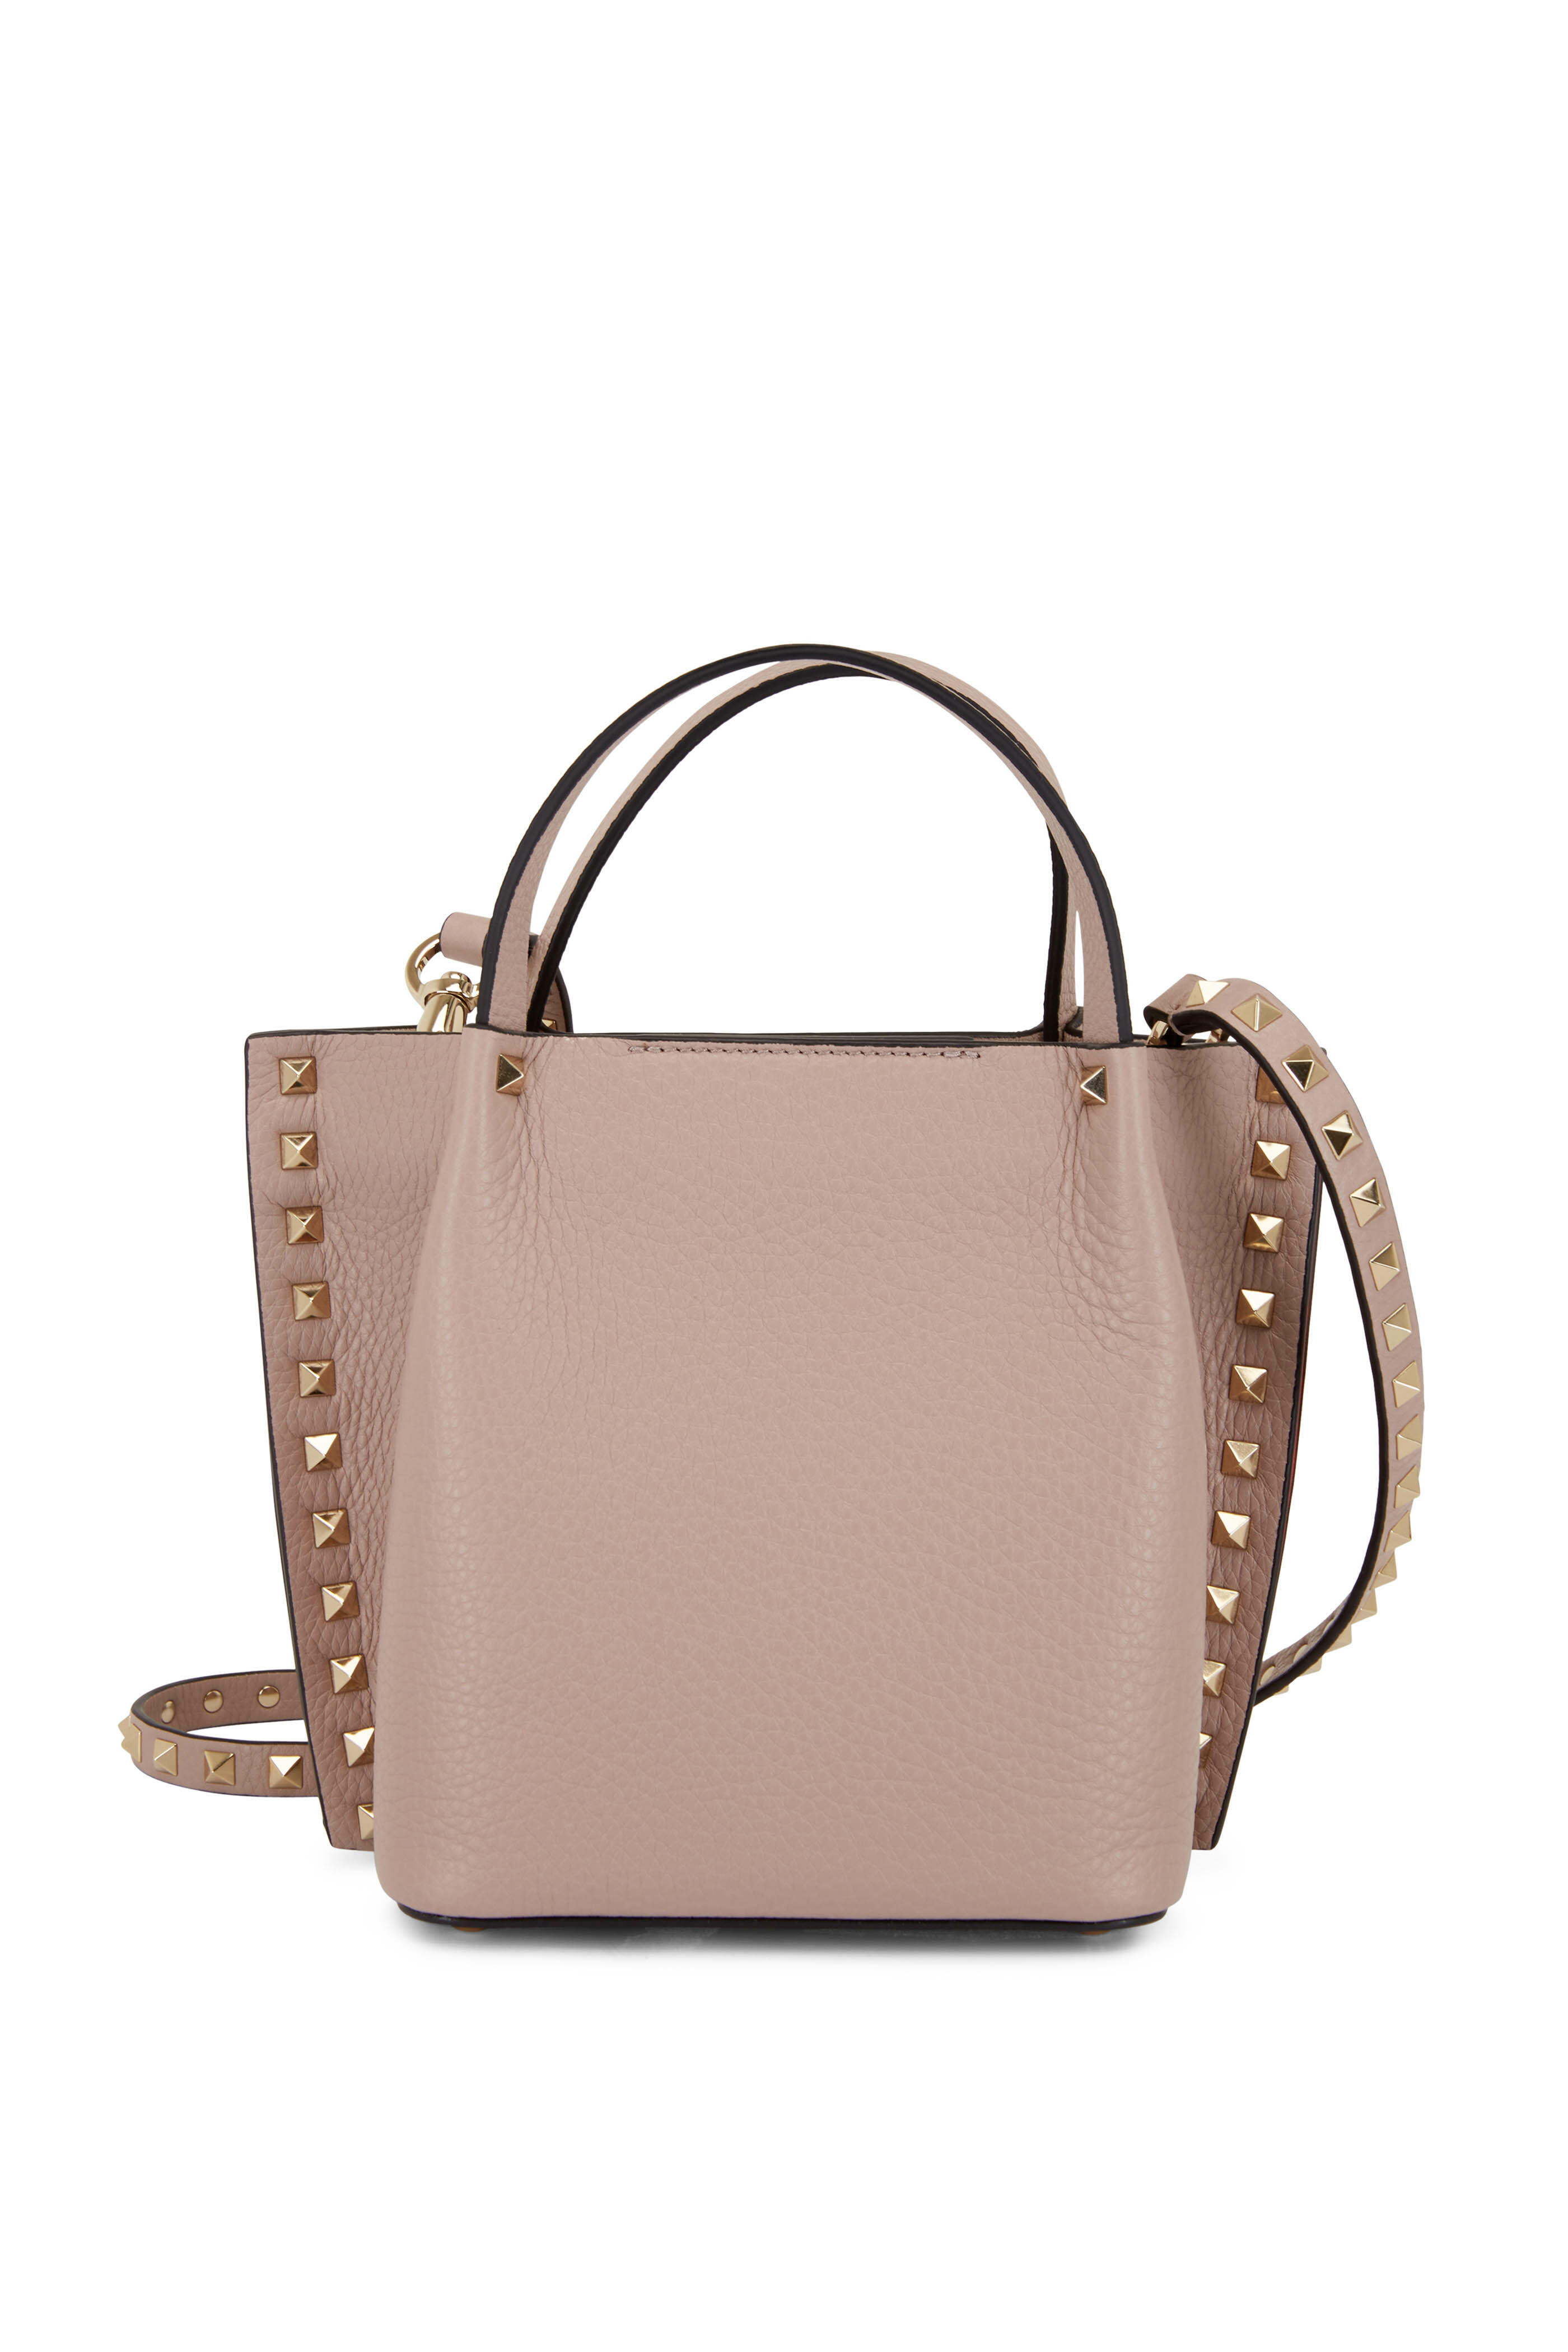 VALENTINO ROCKSTUD BAG REVIEW // Was it the perfect tote I